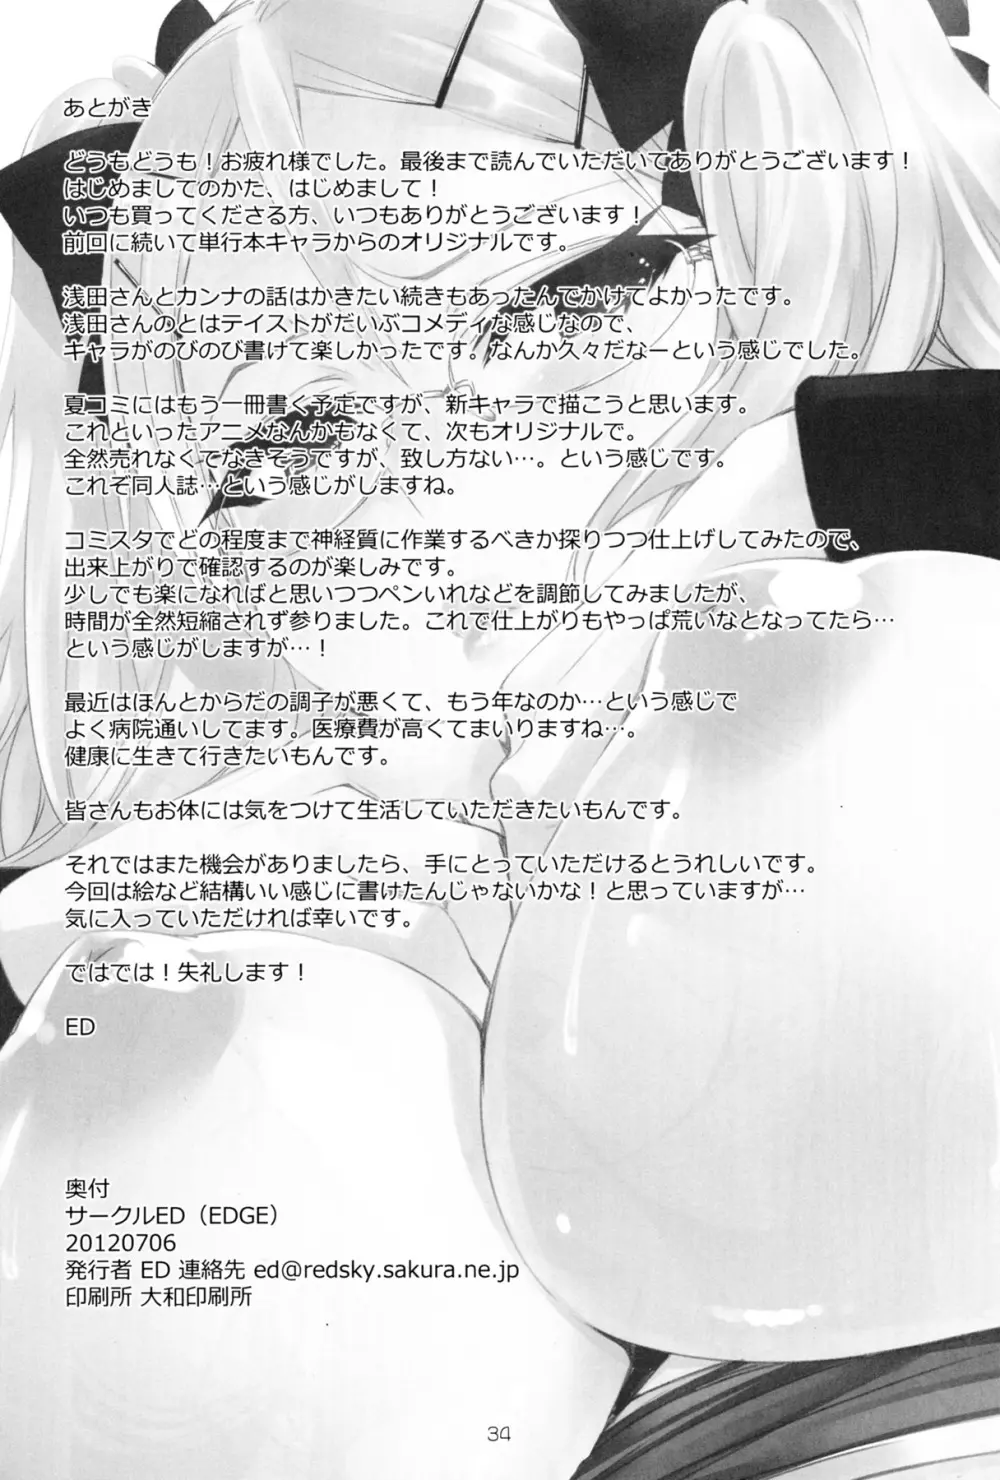 EDのカンナのエロい本 Page.34